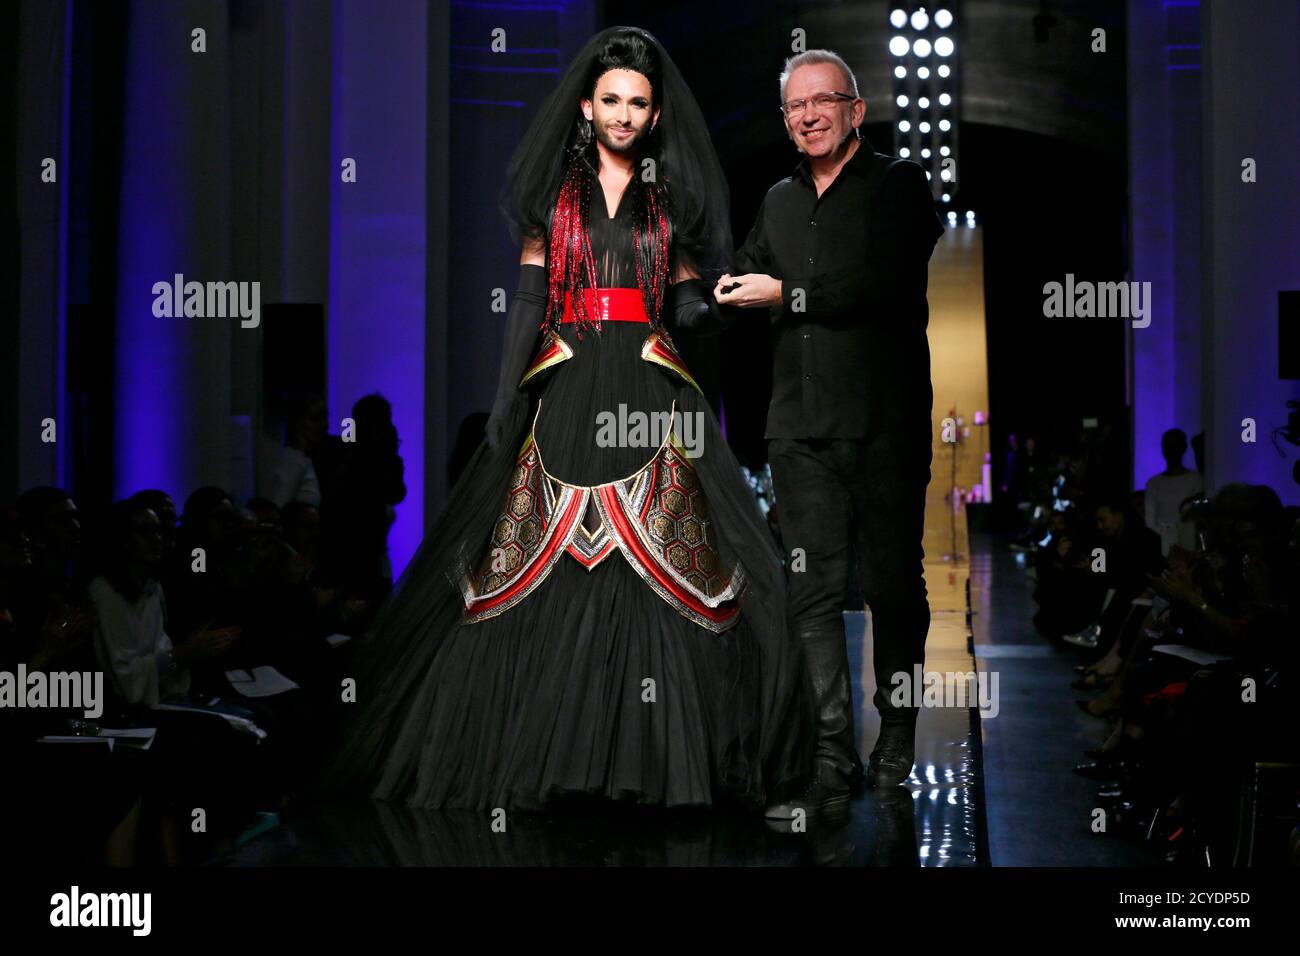 French designer Jean Paul Gaultier (R) appears with Eurovision Song Contest  winner Conchita Wurst at the end of his Haute Couture Fall/Winter 2014-2015  fashion show in Paris July 9, 2014. REUTERS/Gonzalo Fuentes (